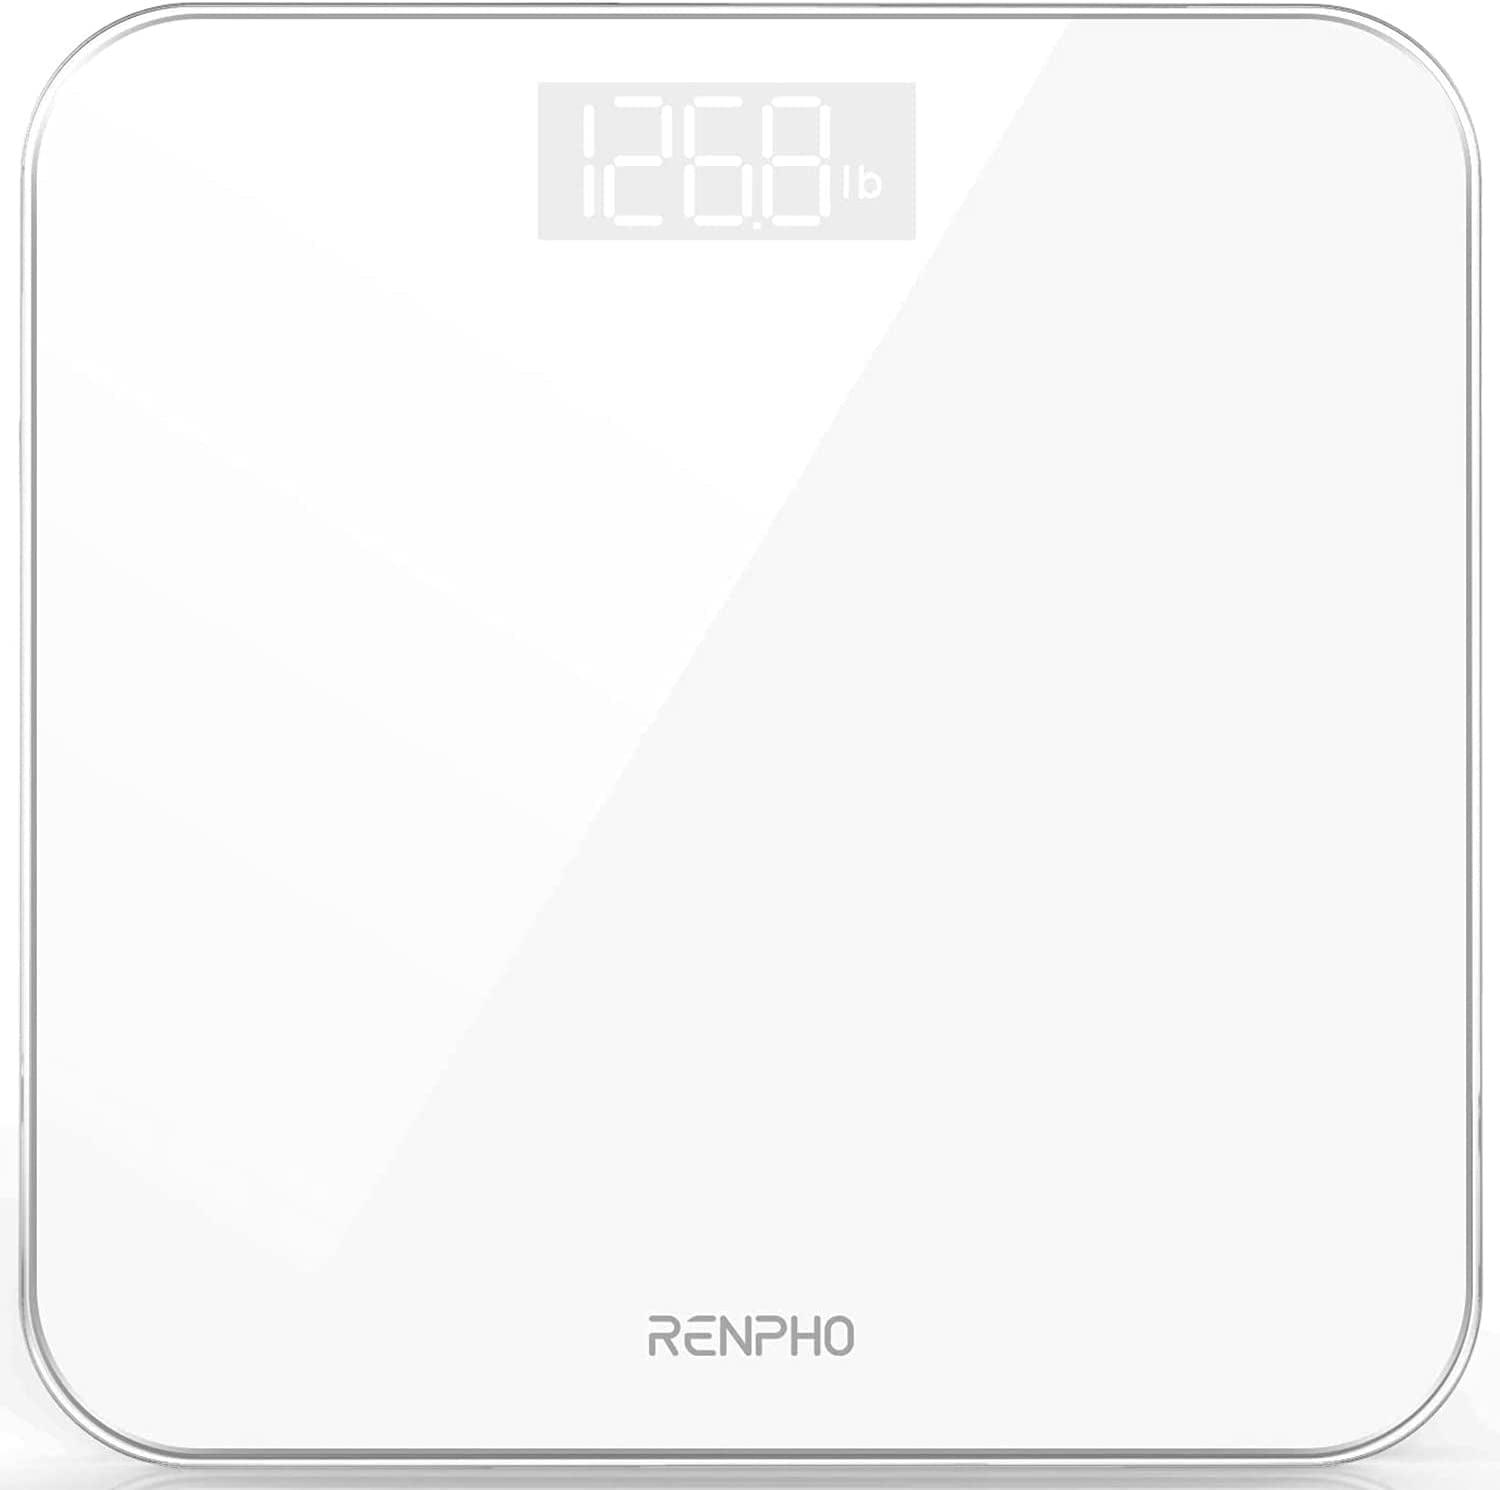 RENPHO Digital Body Weight Scale, Highly Accurate Scale for Body Weight with LED Display, Round Corner Design, Anti-Slip, 400 lb, White